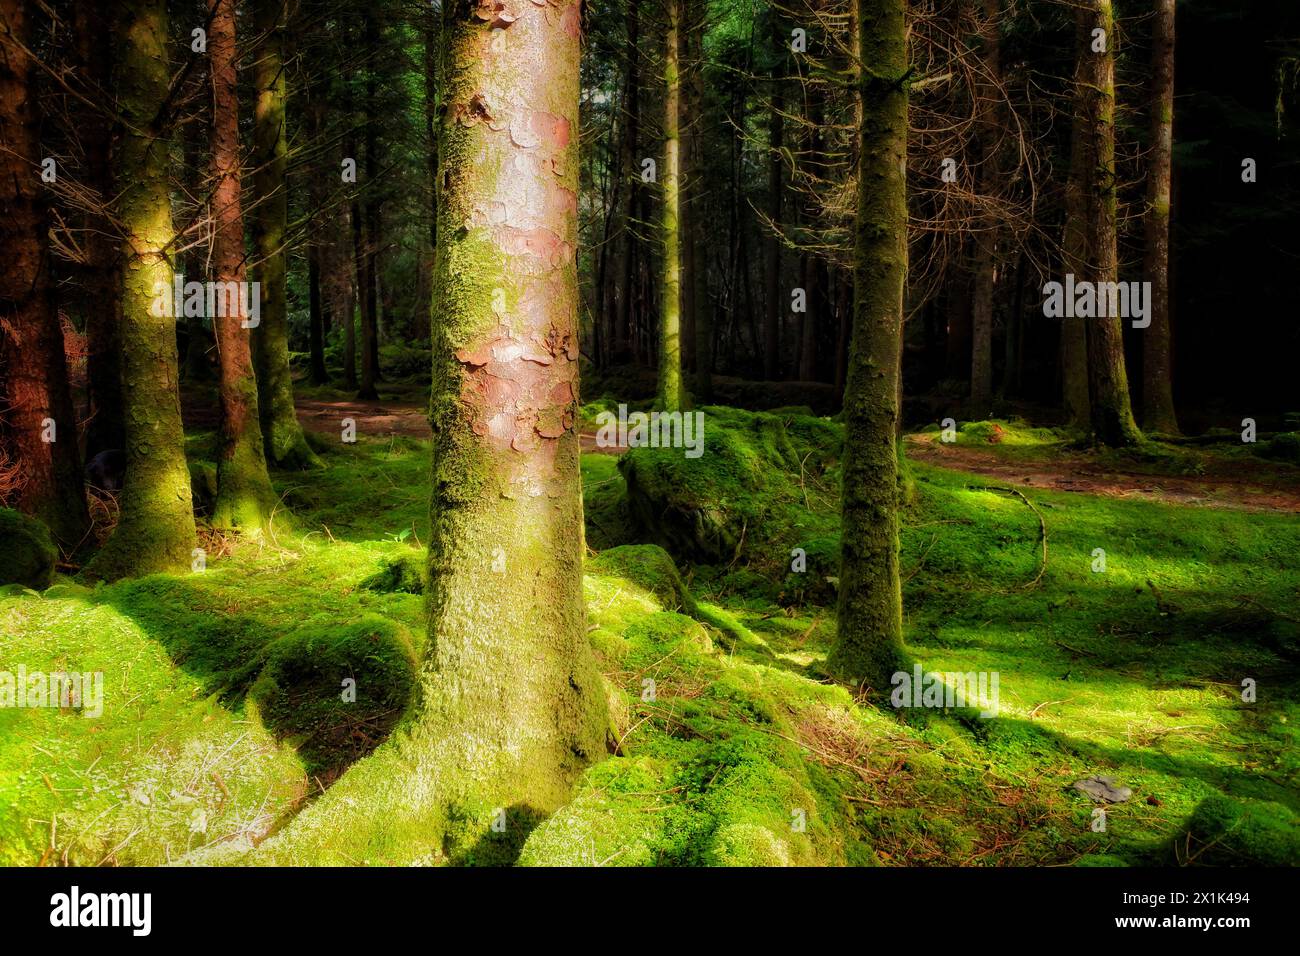 Pine forest at Cashelkeelty, County Kerry, Ireland - John Gollop Stock Photo